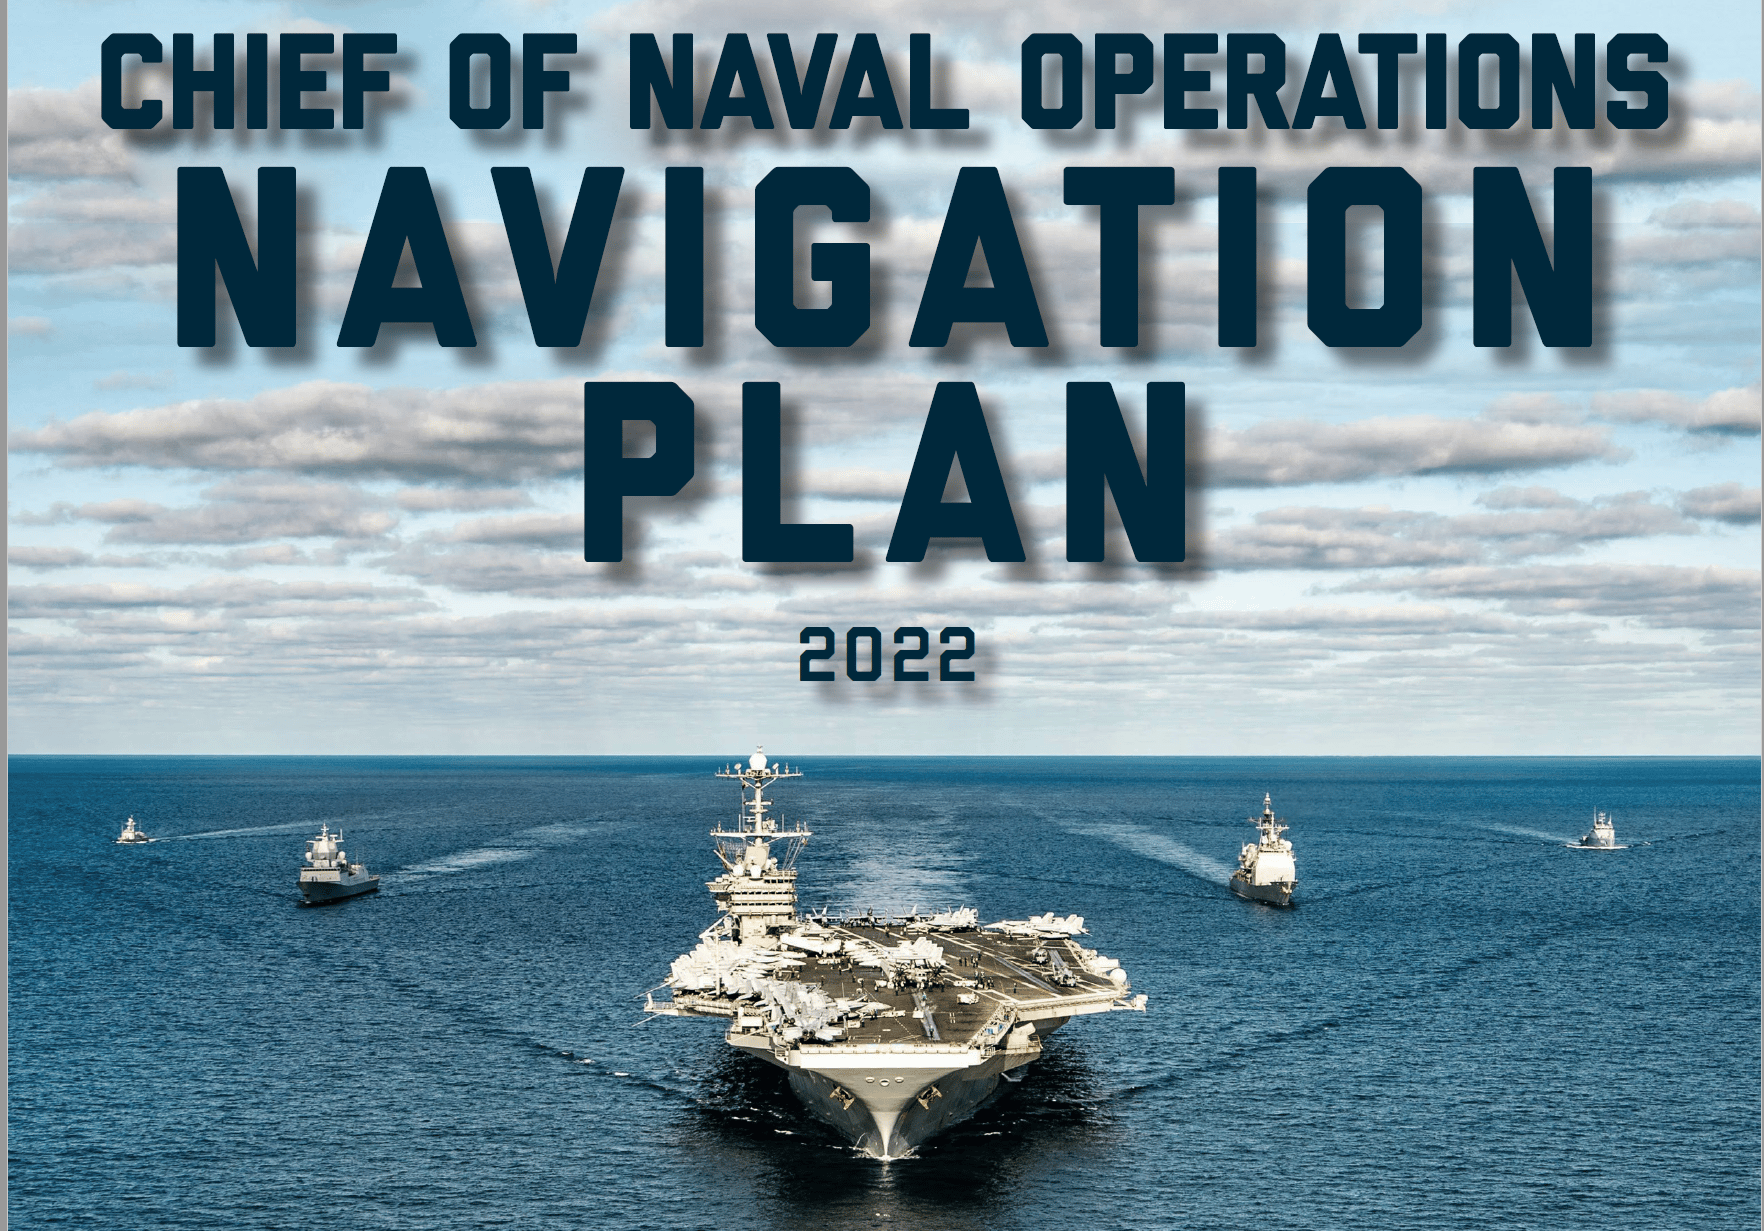 The Navy's Fleet Plan Has Two Strikes Against It